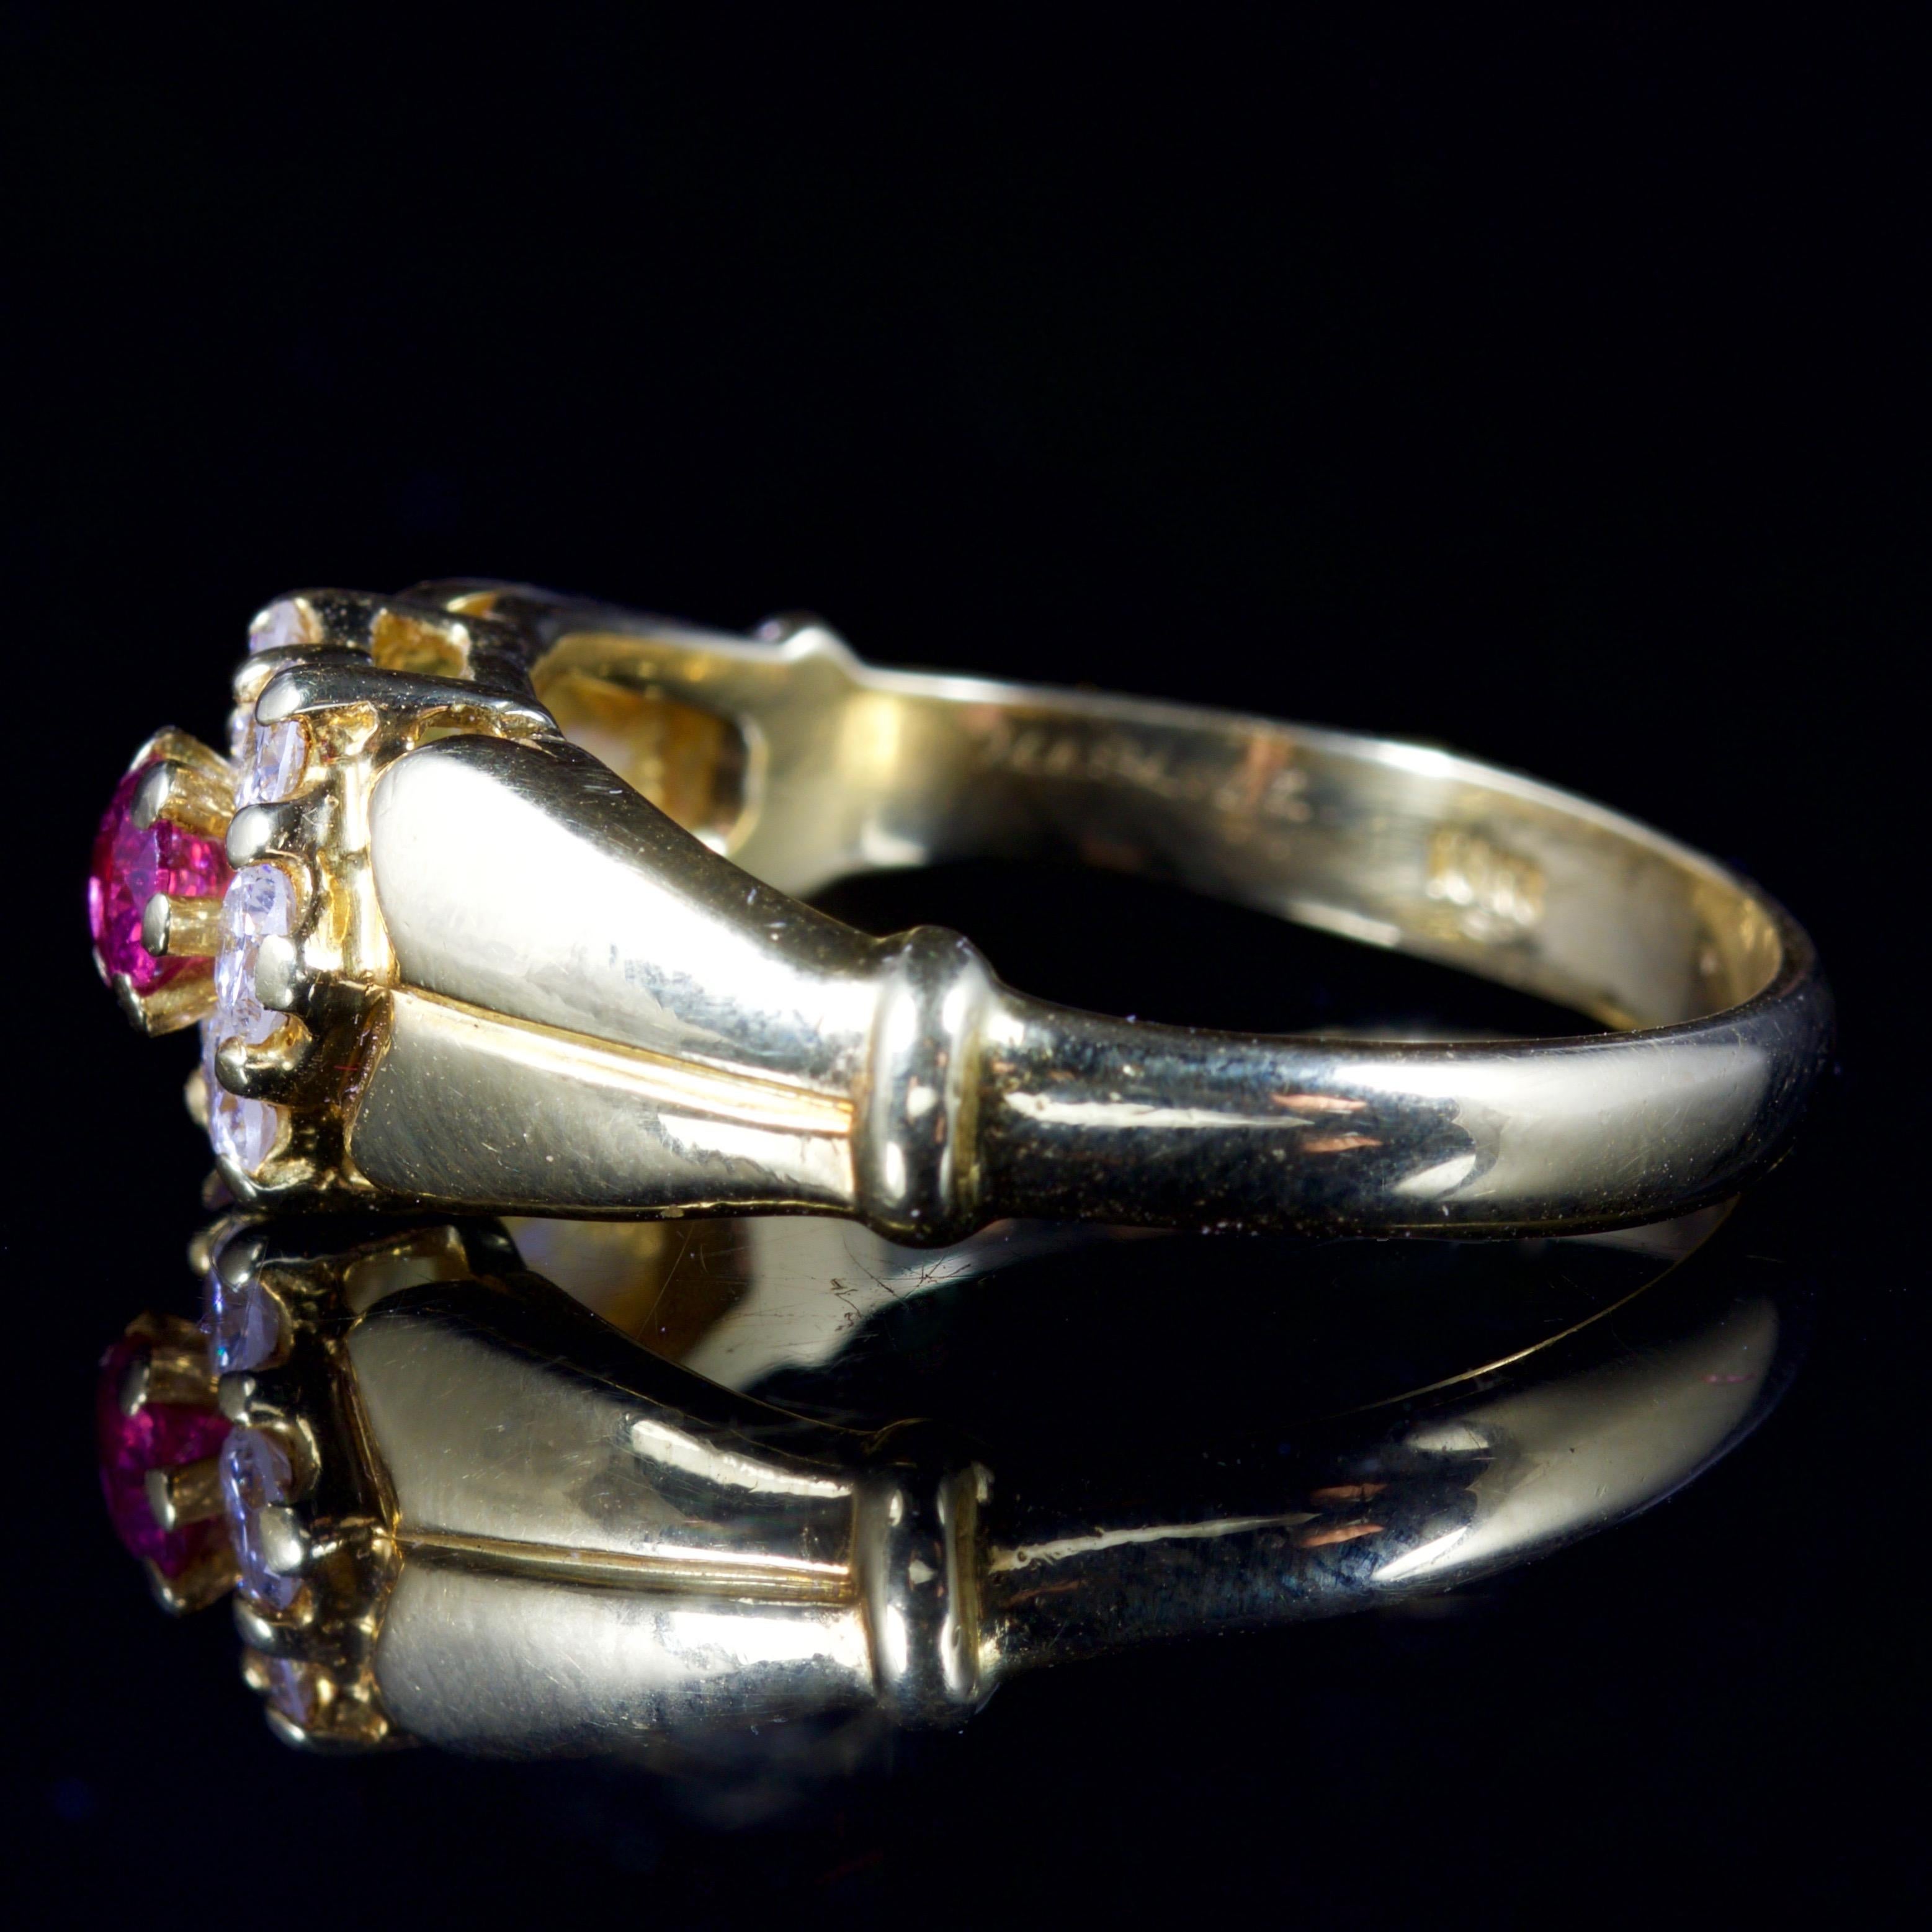 This beautiful Victorian Ruby and Diamond ring is set in 18ct Yellow Gold, Circa 1880.

The ring is set with a central Ruby, with glistening Diamonds surrounding it.

The Ruby is 0.15ct, and the Diamonds are 0.7ct each showing a fabulous cut, colour